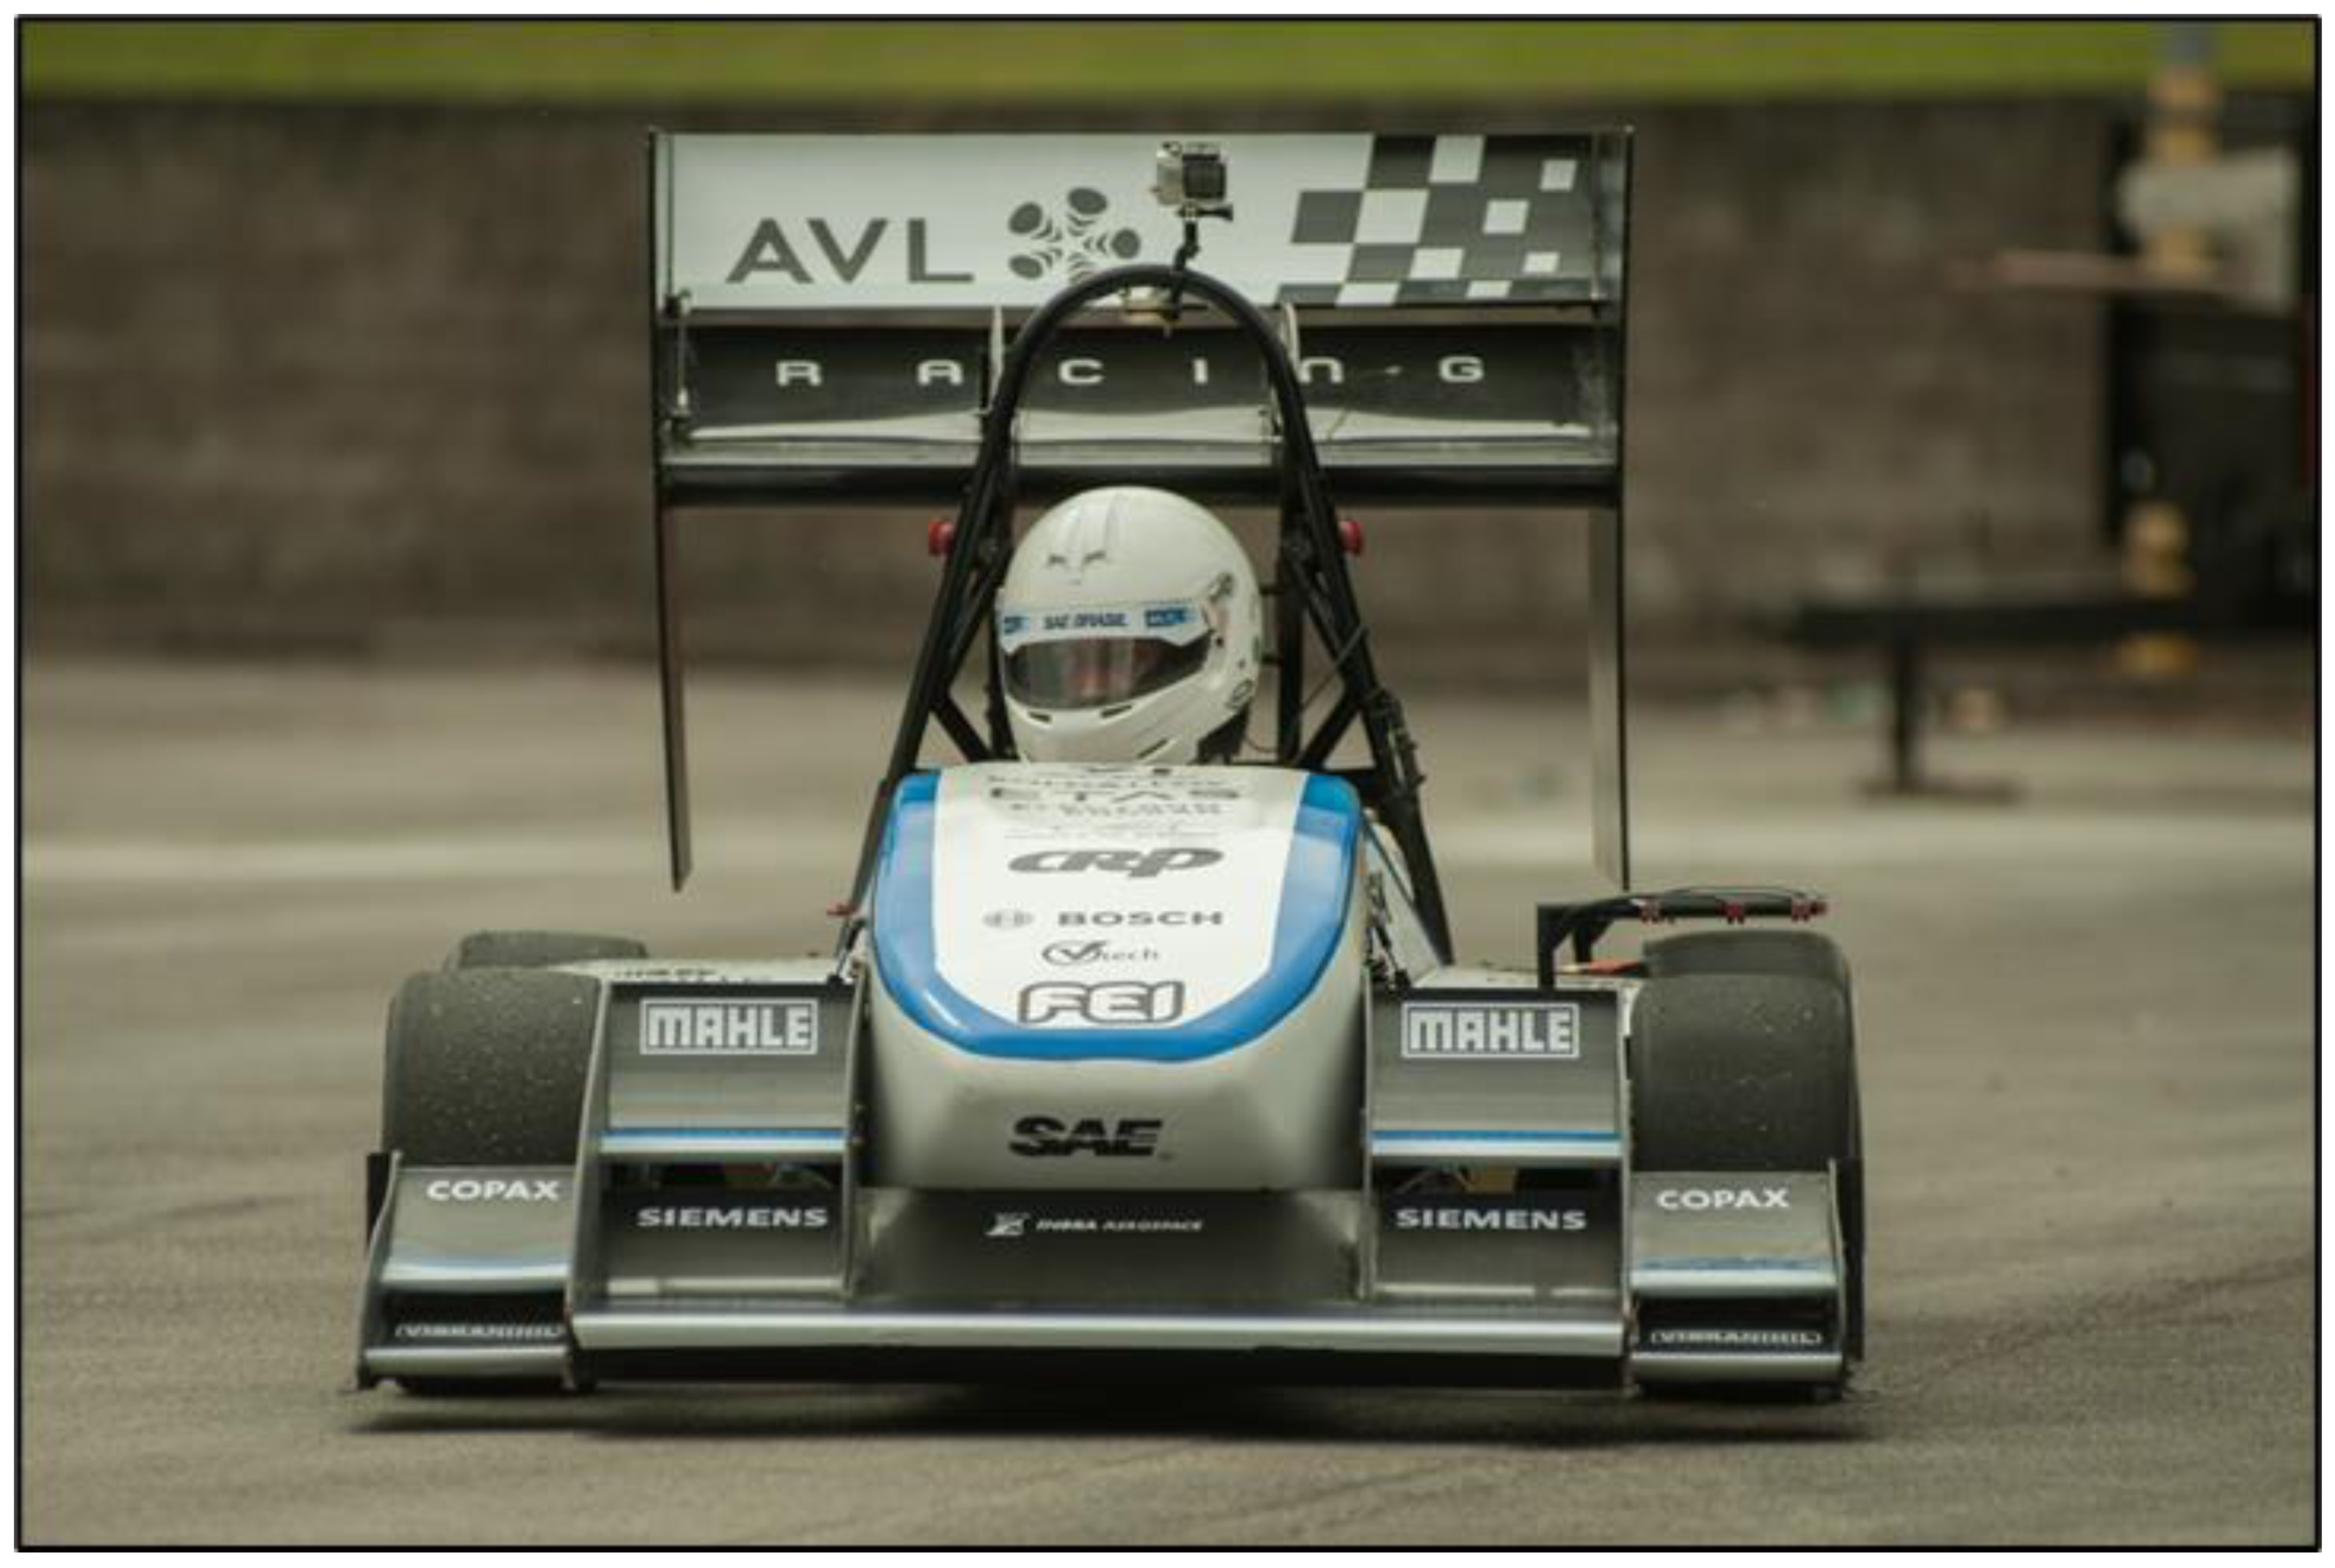 Auto Racing Test Drives Its Own EV Future - IEEE Spectrum